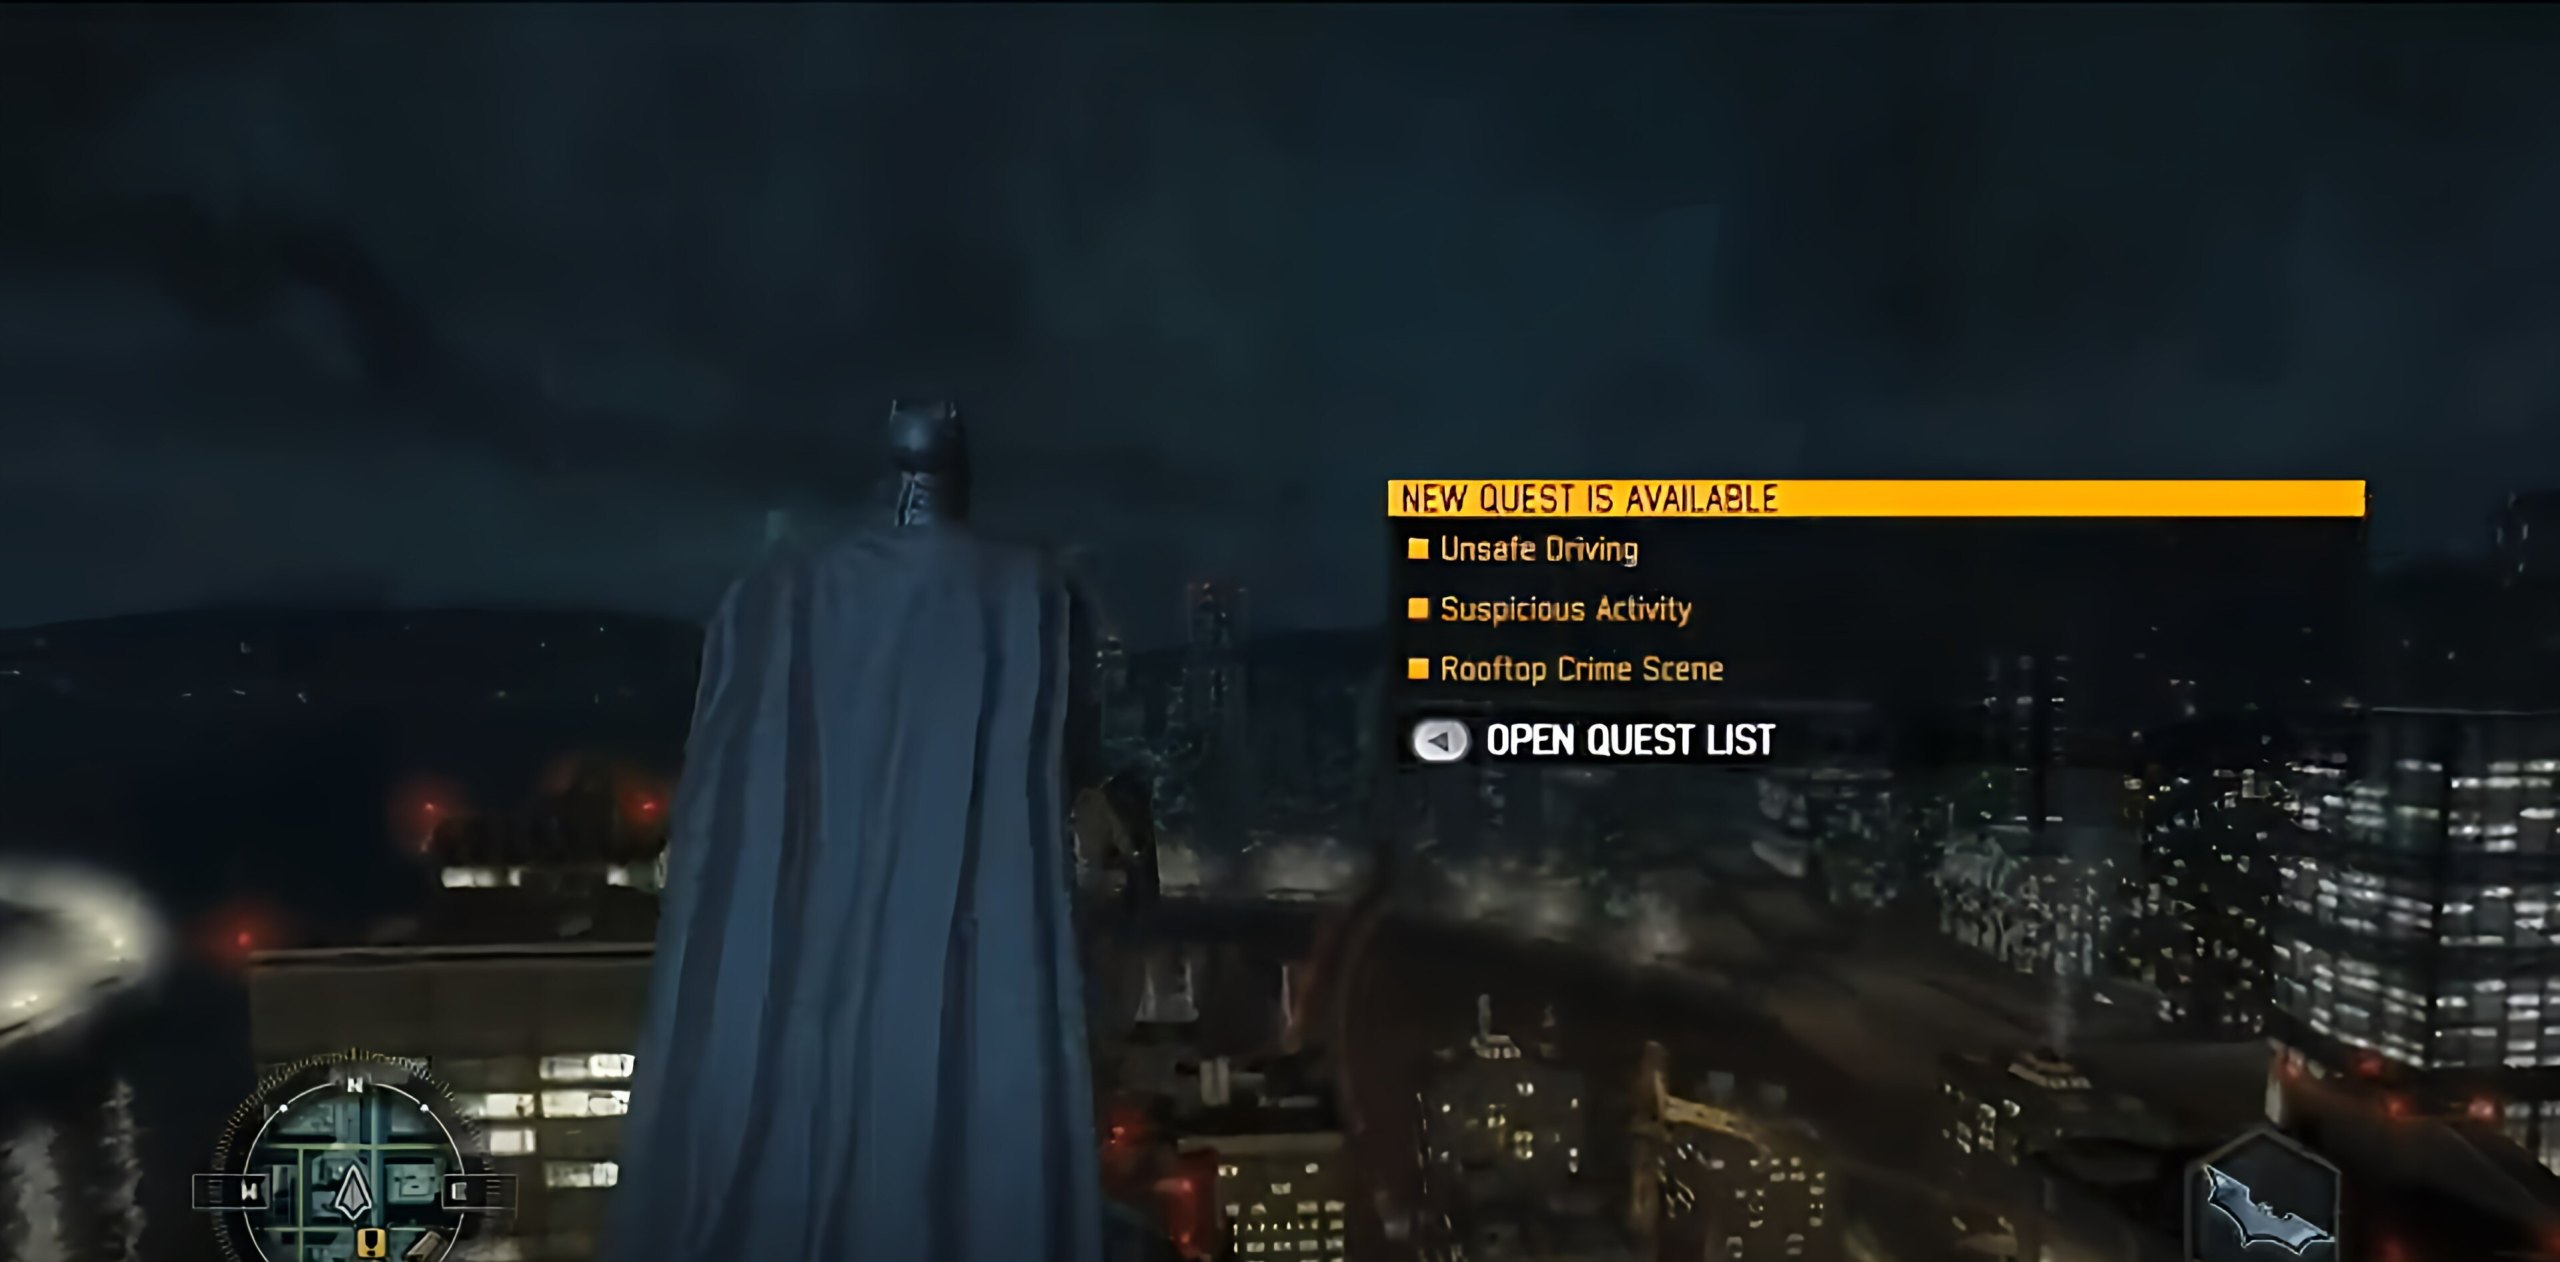 The Canceled Batman Game Has Resurfaced Online | Image Source: Internet Archive